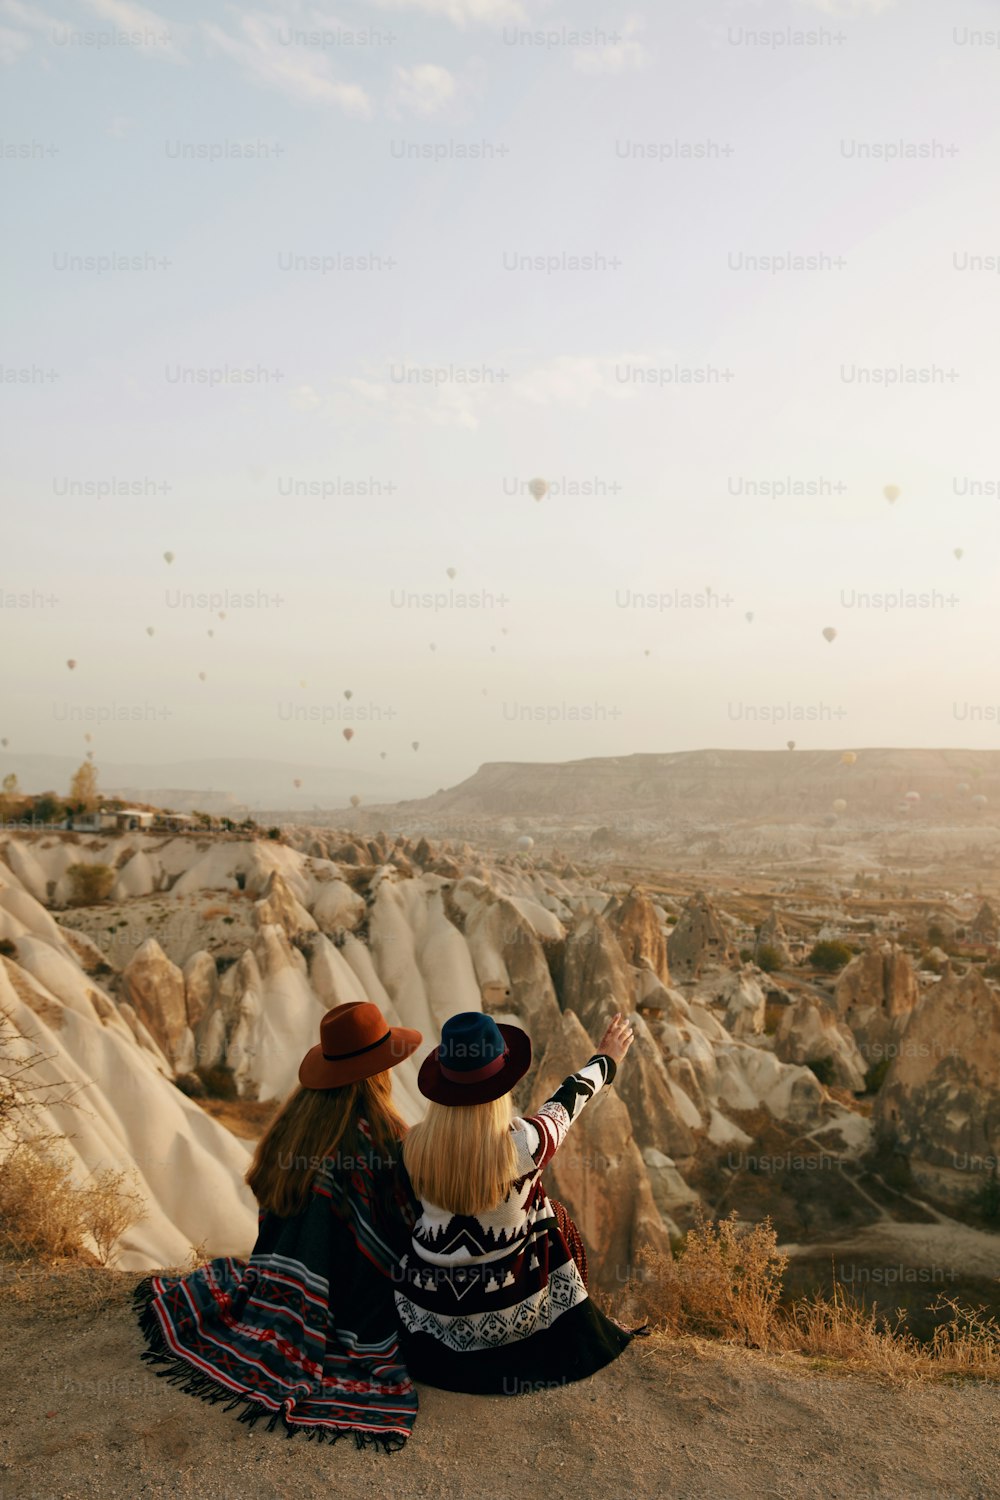 Travel. Women Travelers Looking At Flying Hot Air Balloons In Sky, Female In Hats Sitting On Hill Enjoying Sunset. High Resolution